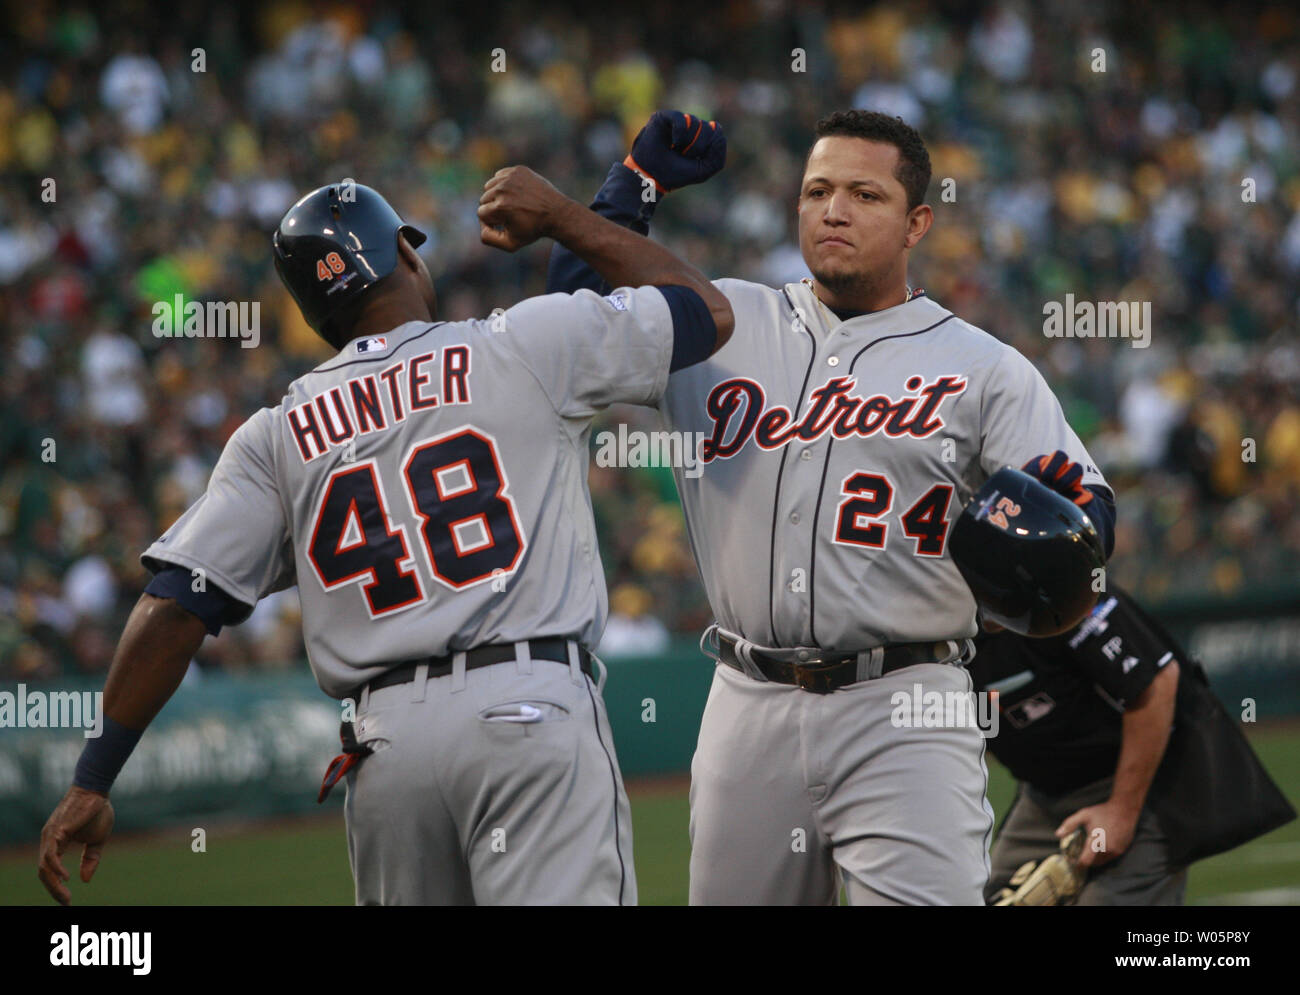 Detroit Tigers Miguel Cabrera (24) celebrates a fourth inning two run home run off Oakland A's Sonny Gray with Tigers Tori Hunter (48) in game 5 of the American League Division Series at O.co Coliseum in Oakland, California on October 10, 2013.     UPI/Bruce Gordon Stock Photo